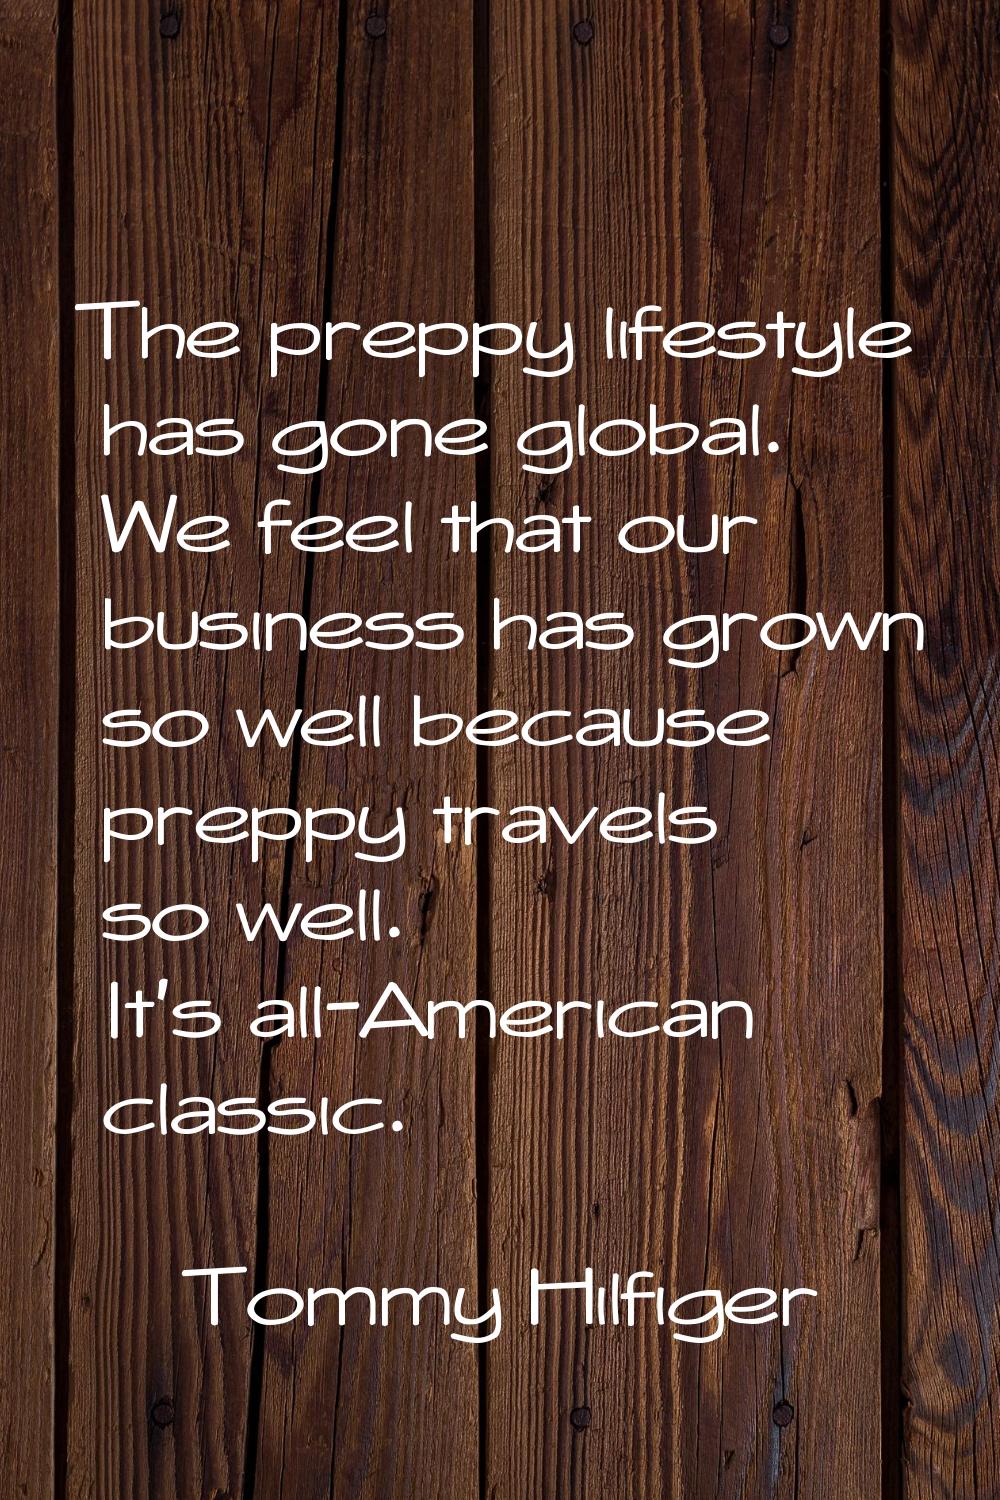 The preppy lifestyle has gone global. We feel that our business has grown so well because preppy tr